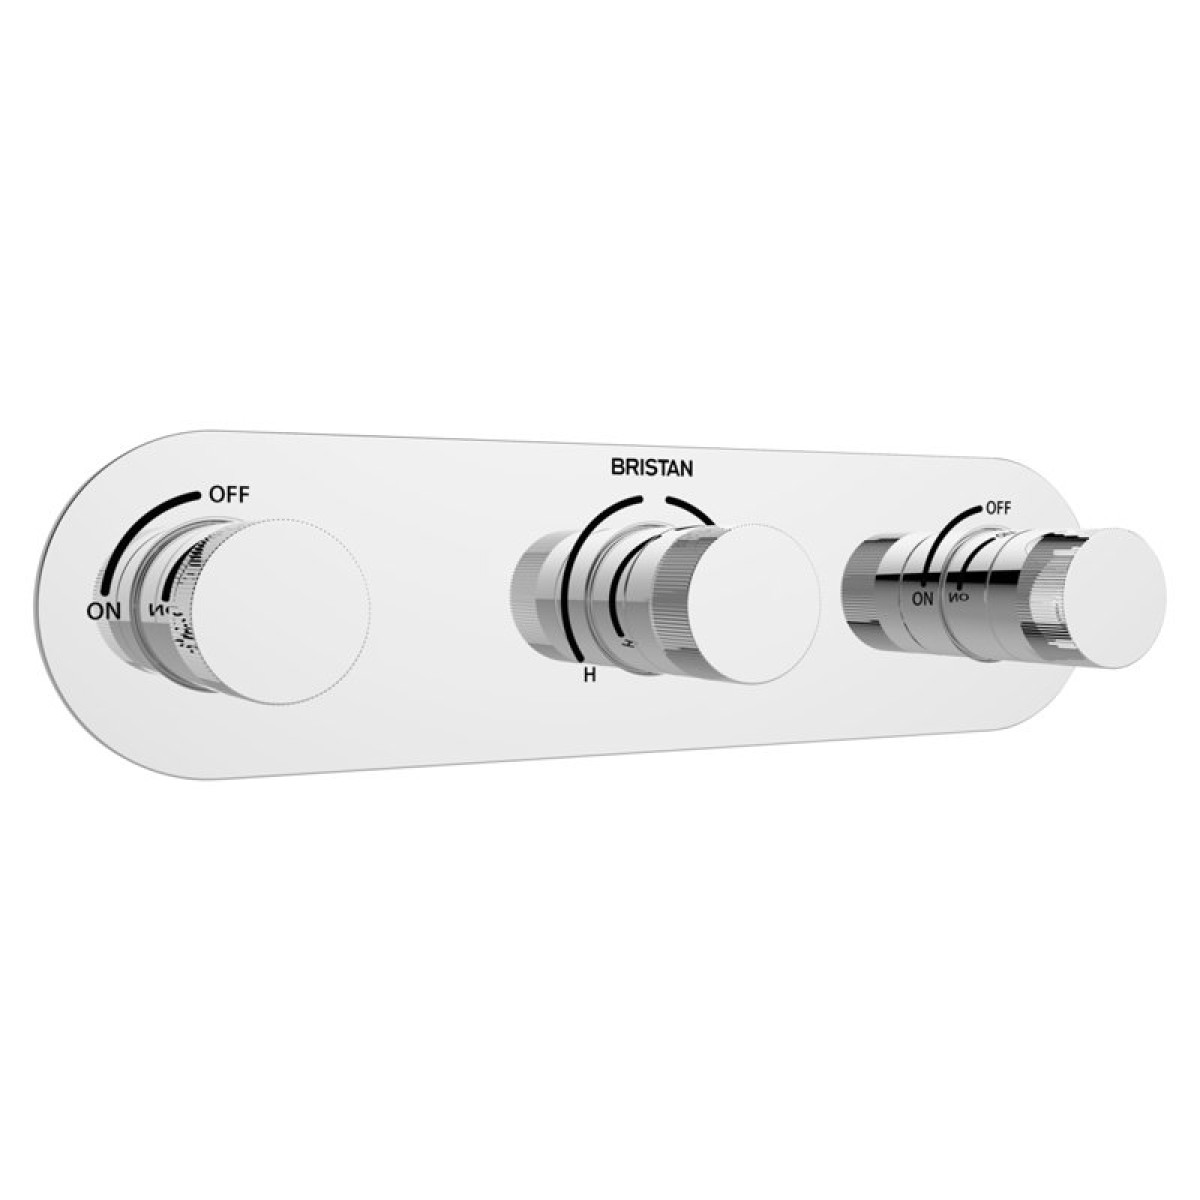 Bristan Tria Recessed Thermostatic Dual Control Shower Valve With Integral Twin Stopcocks Chrome